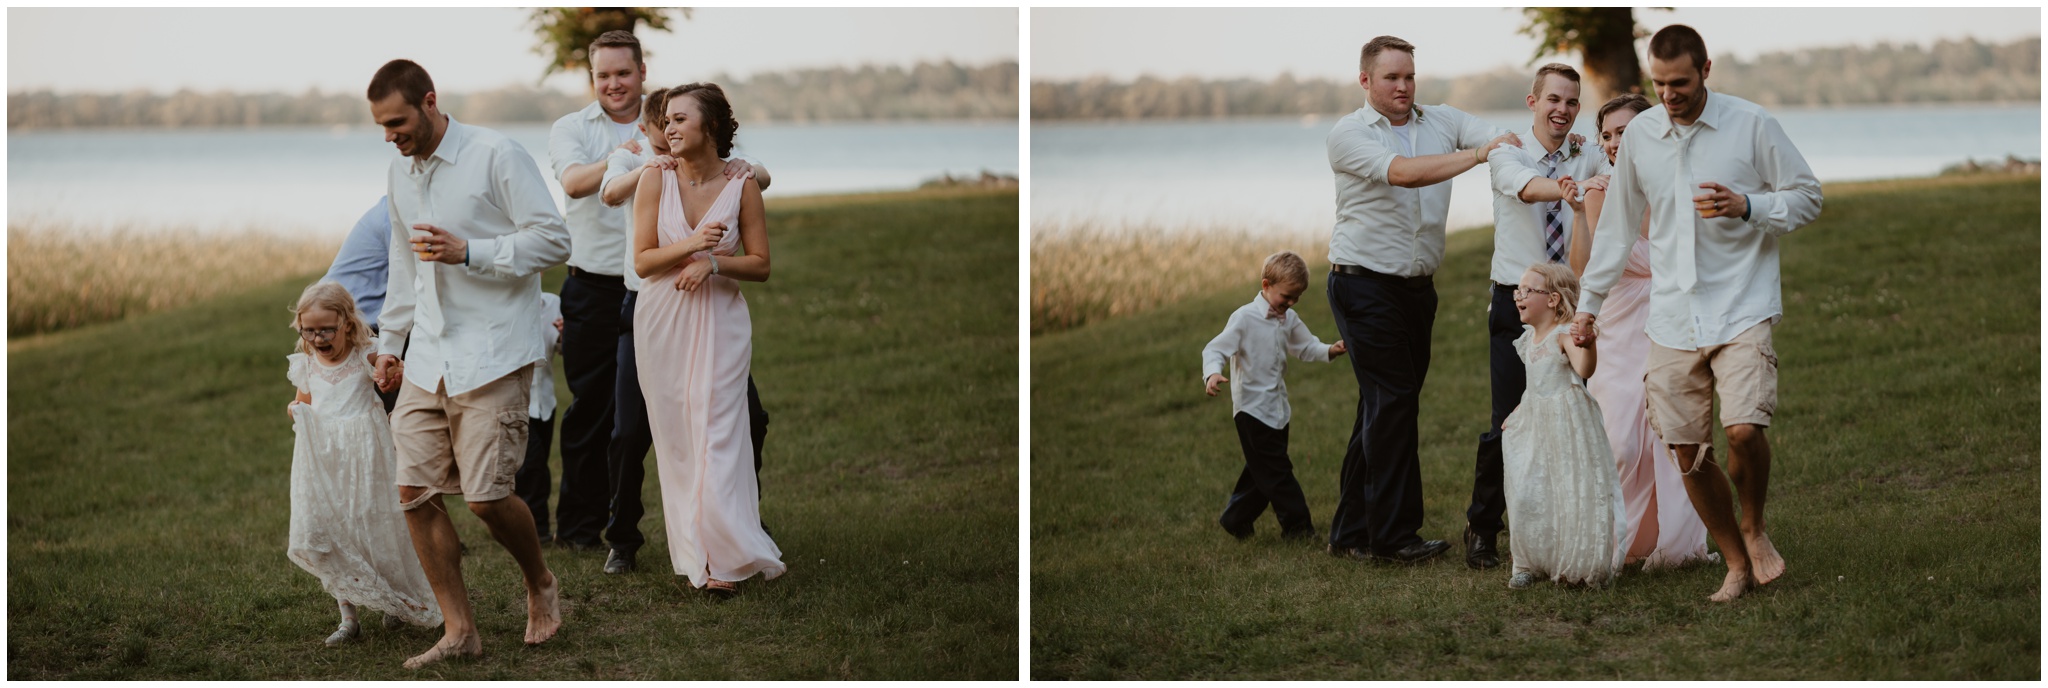 The Morros Chicago Wedding Photography John and Paige July Minnesota Outdoor Wedding_0255.jpg